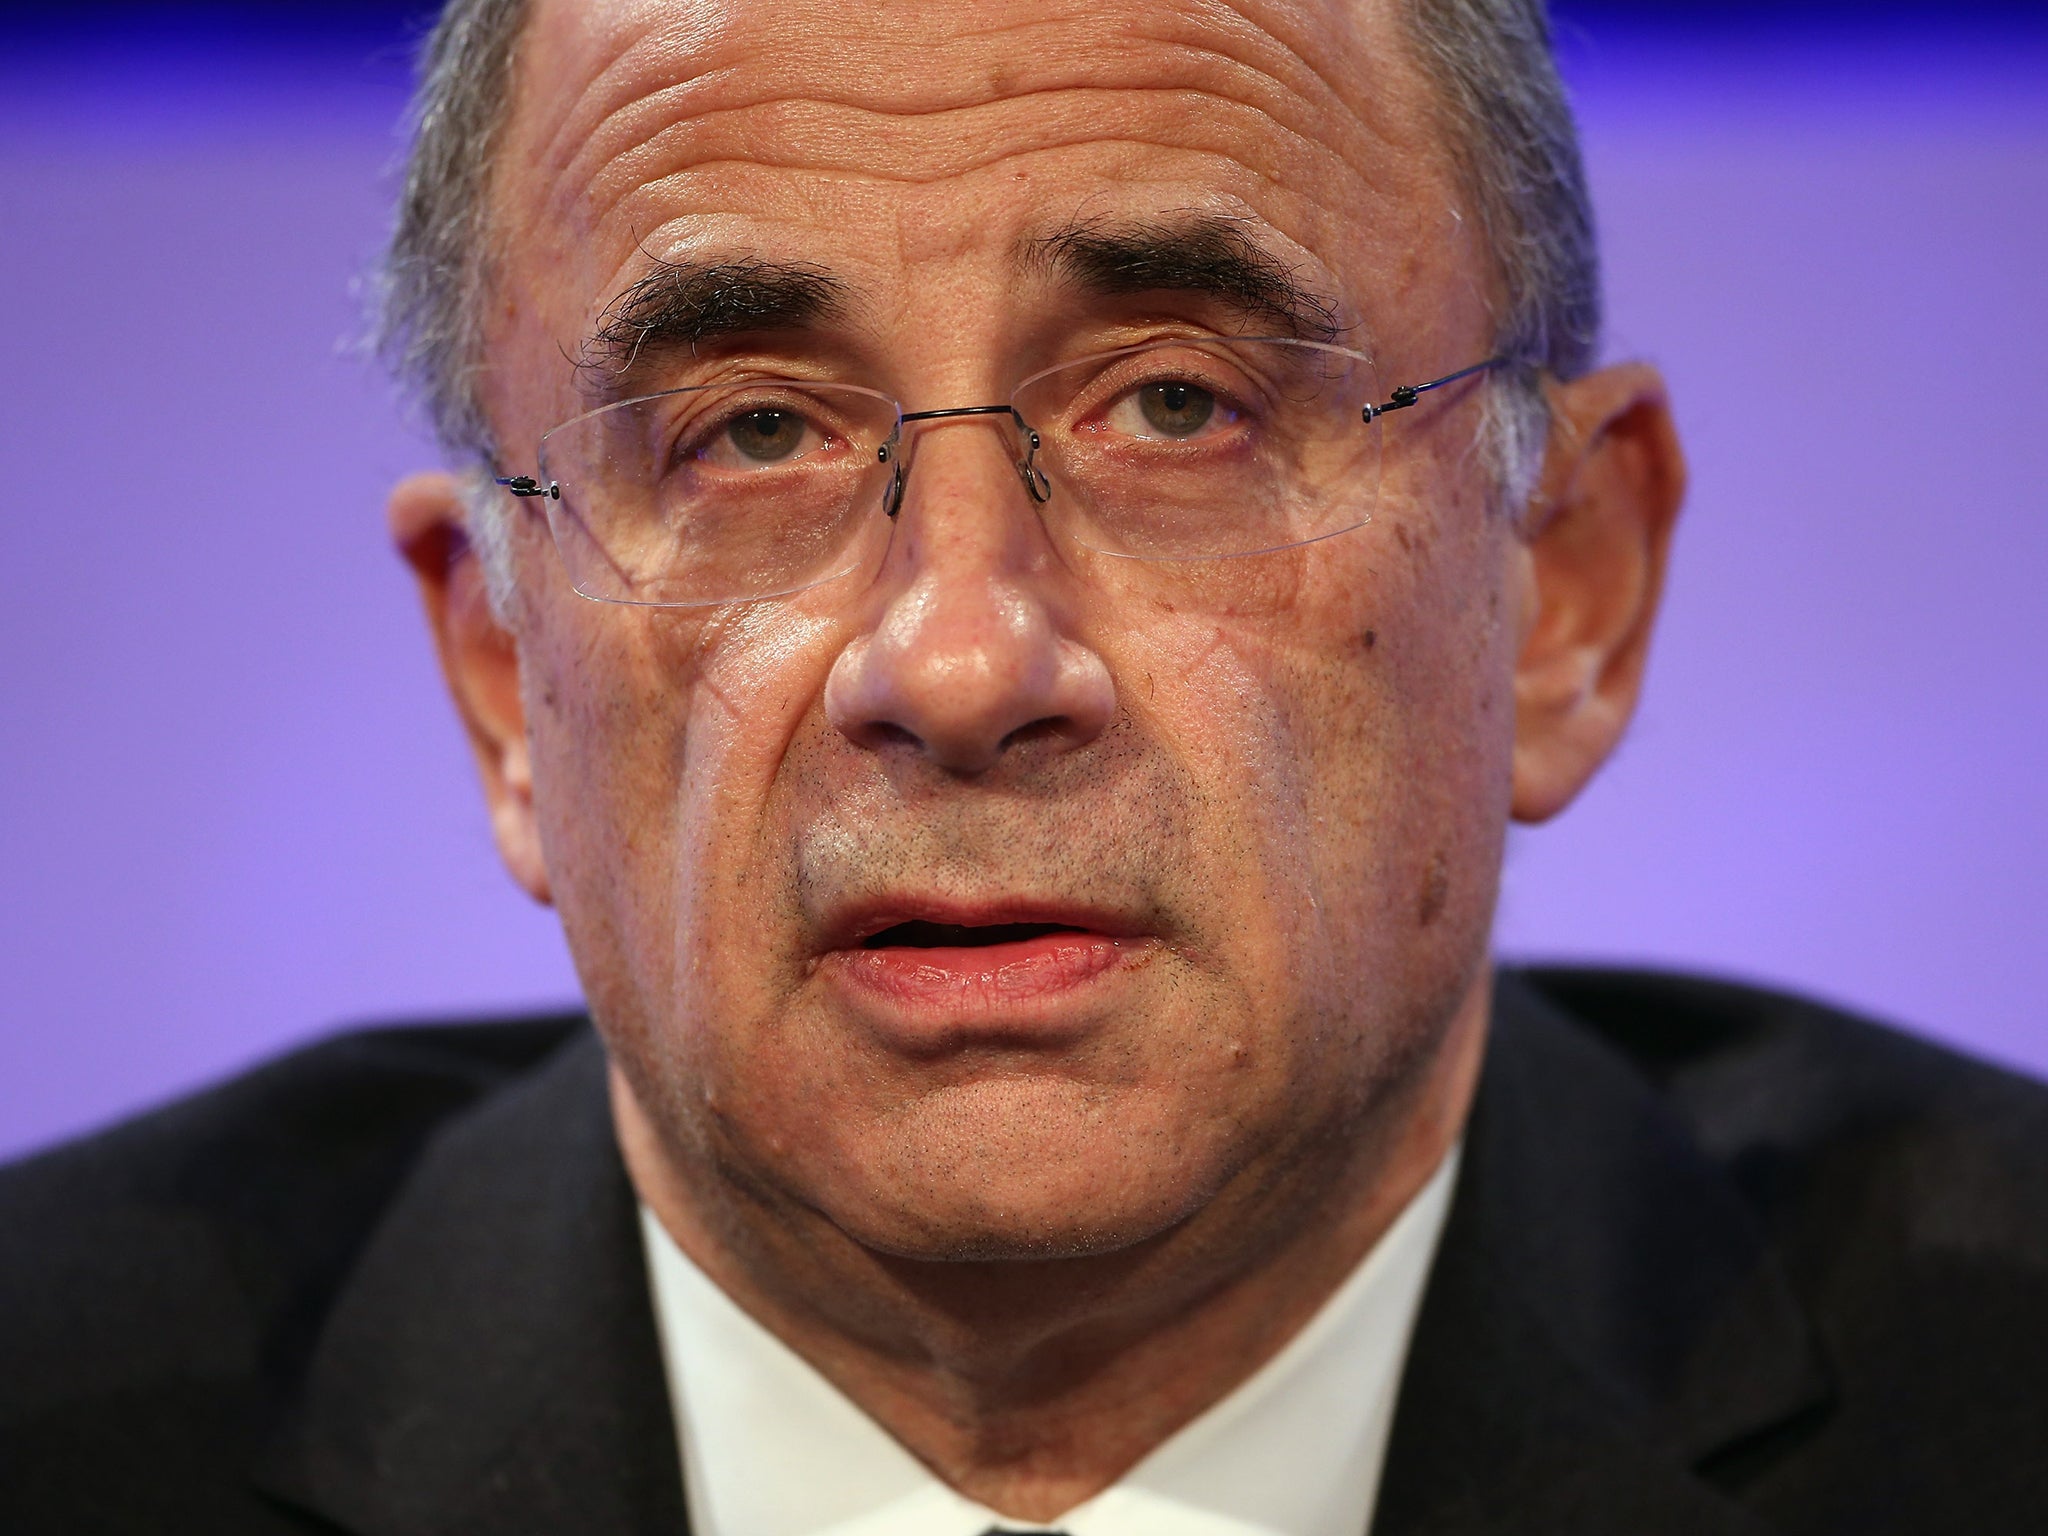 Leveson was asked by David Cameron to chair the first part of the public inquiry following the phone-hacking scandal